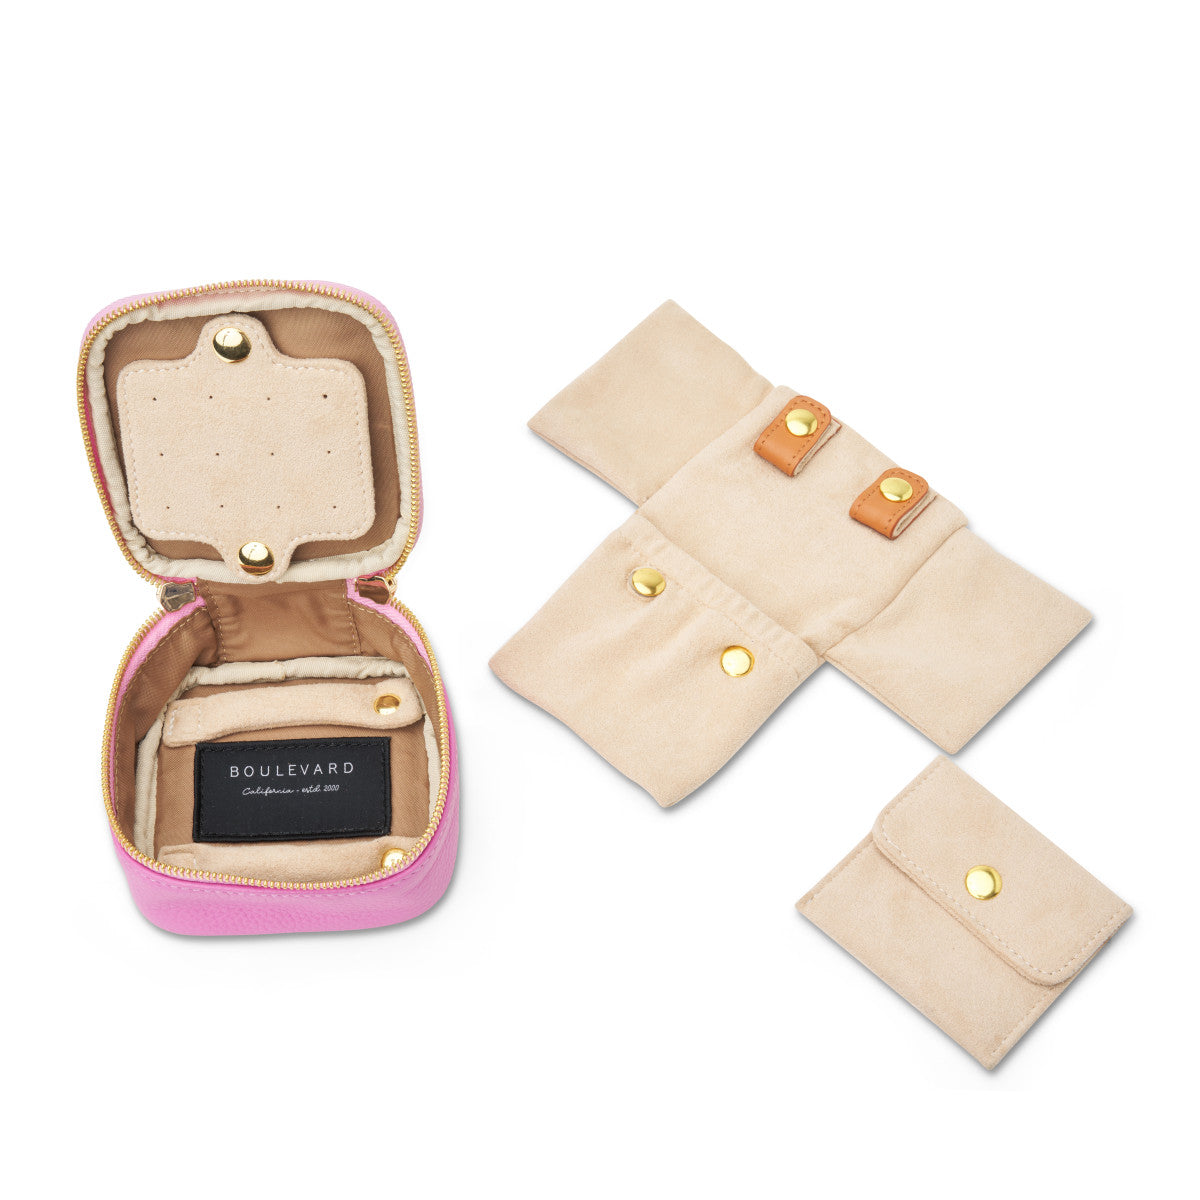 Small Leather Jewelry Case Pink - LE BLING - Give Wink